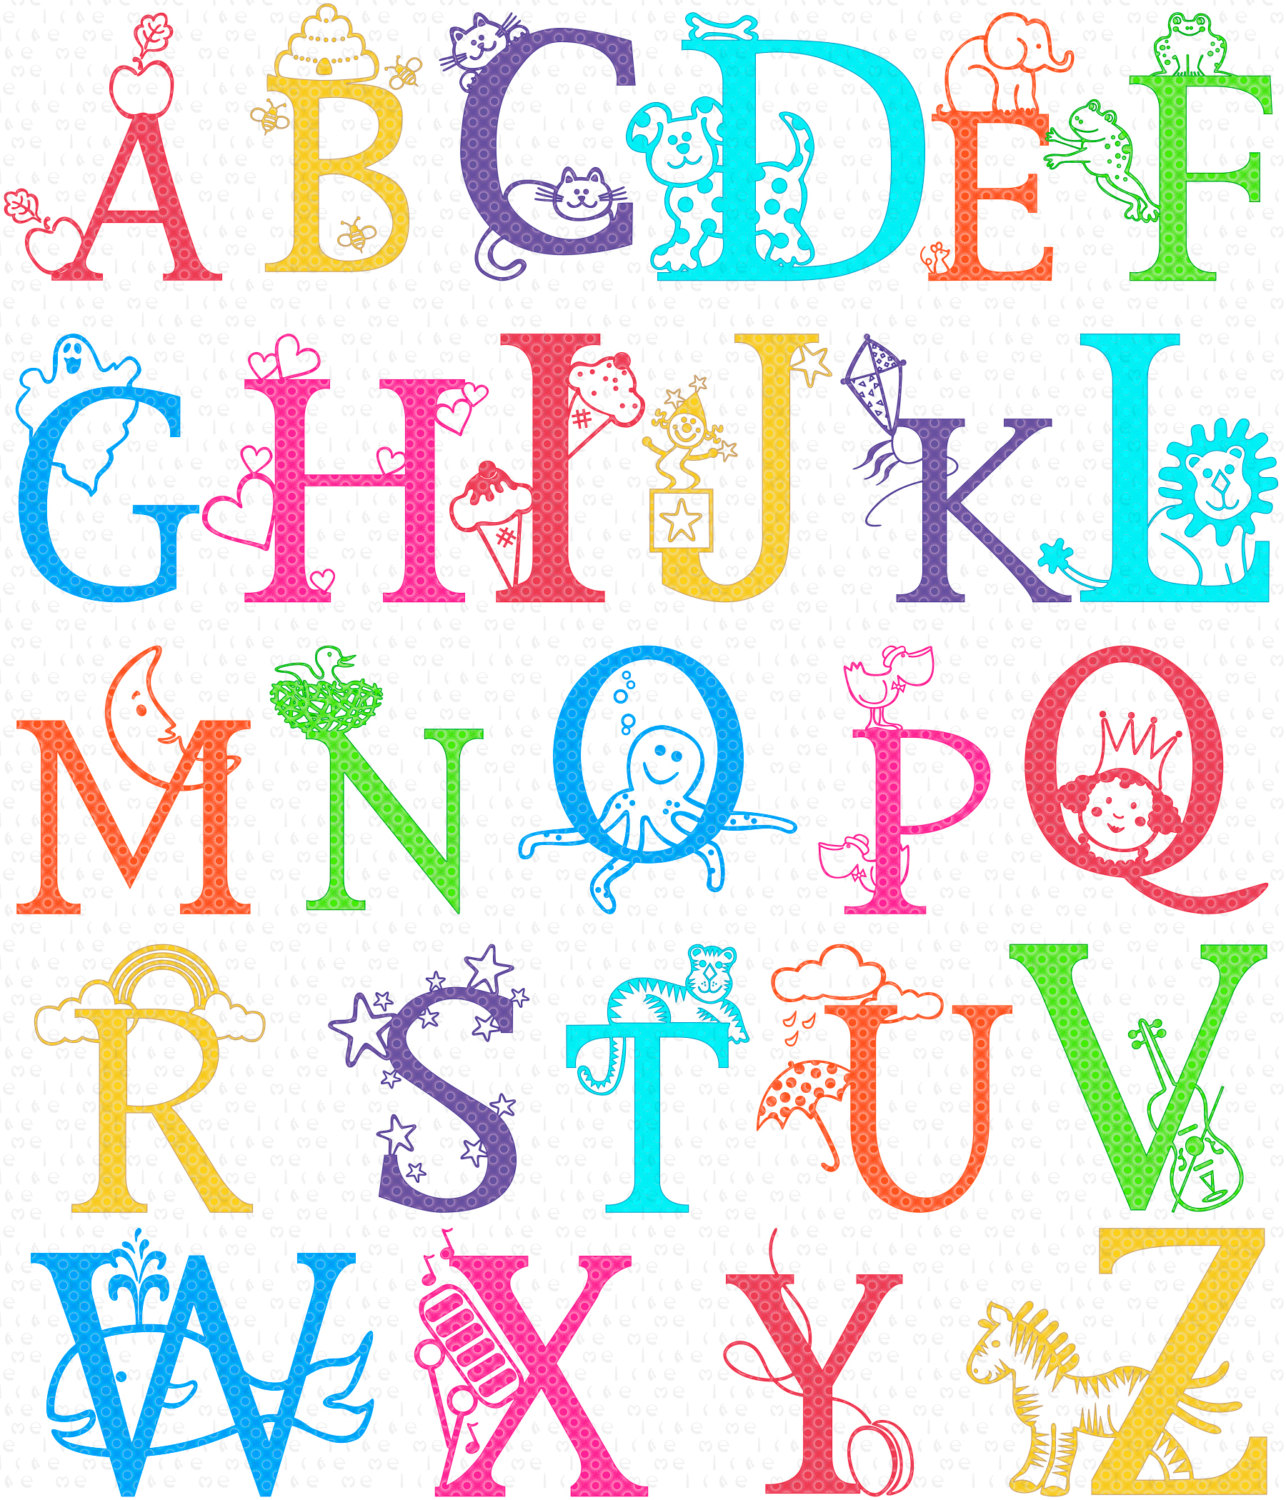 Free Images Of The Alphabet Download Free Images Of The Alphabet Png Images Free ClipArts On 